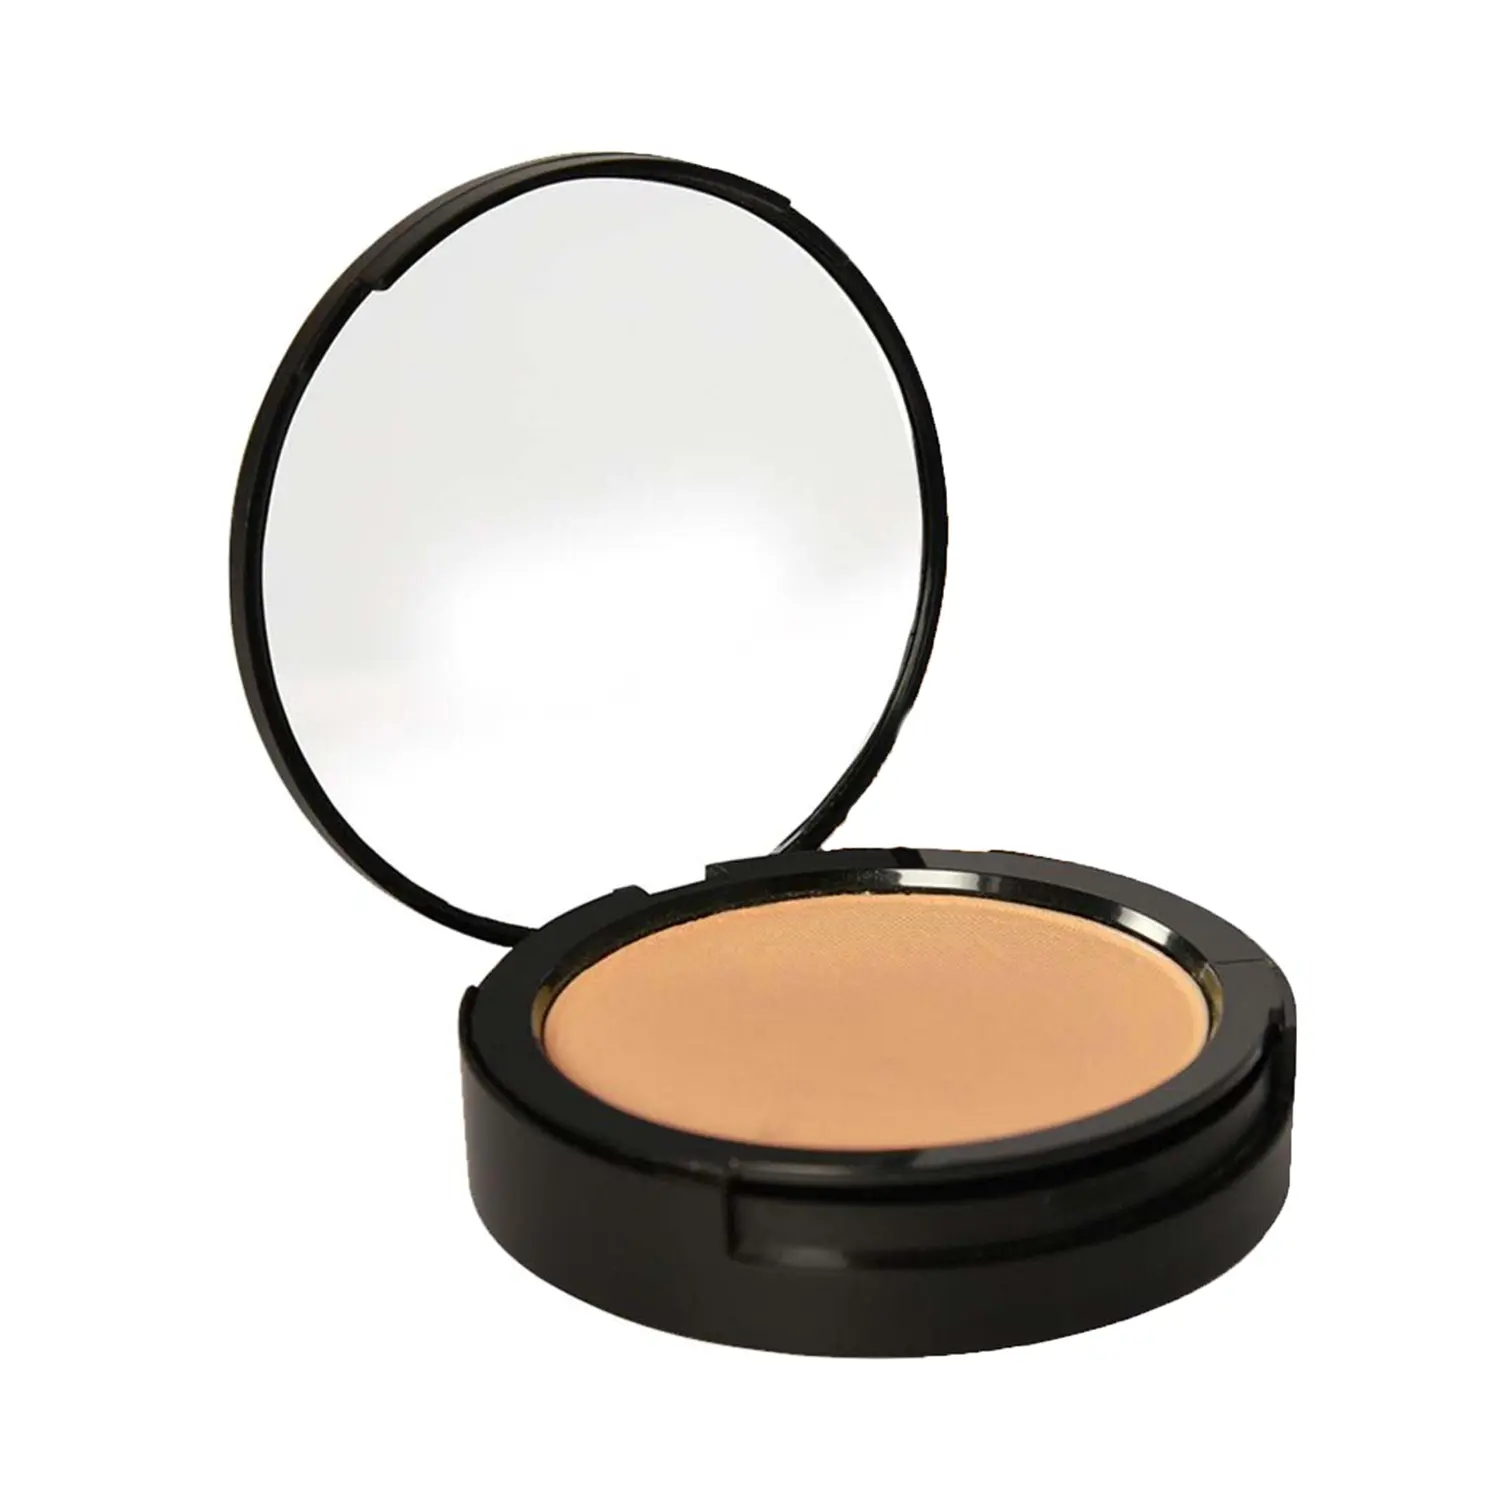 Coloressence | Coloressence Compact Powder - Ivory Beige (10g)